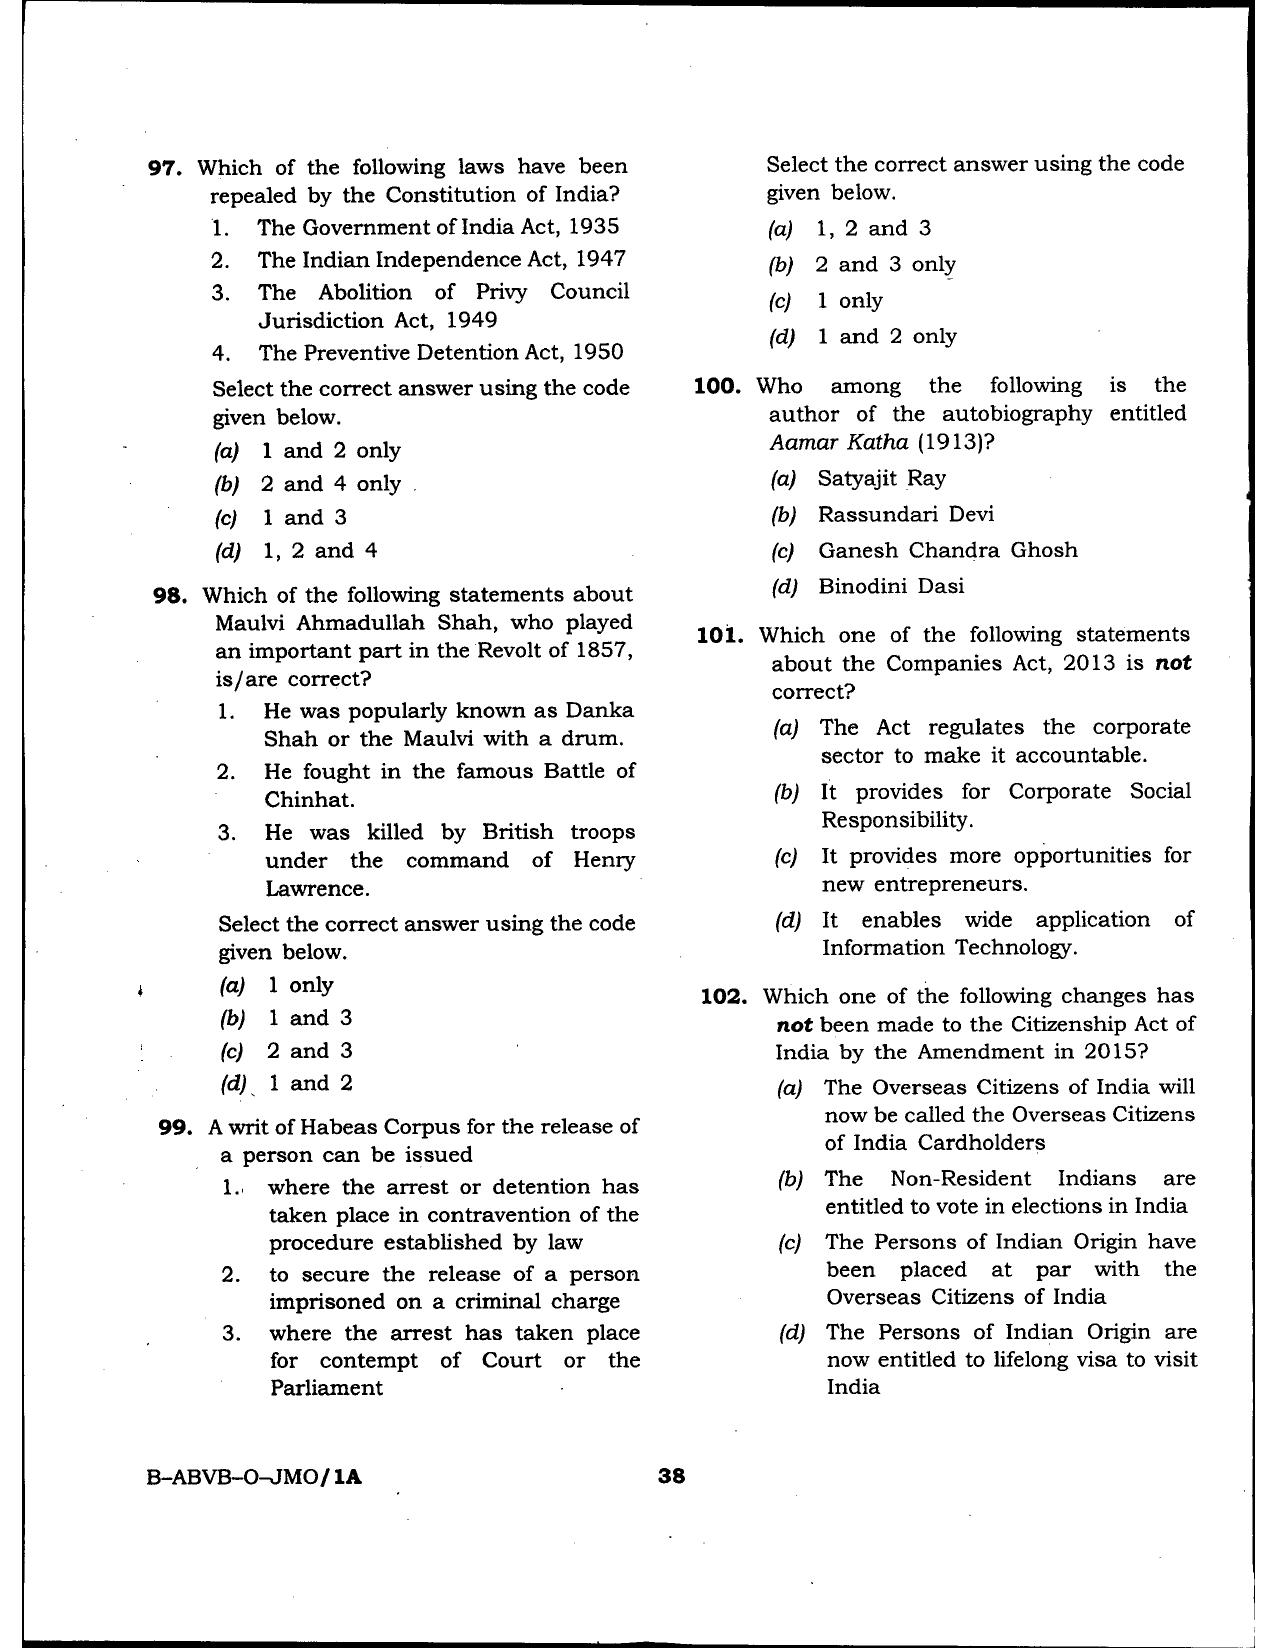 HPSSSB Fitter Model Papers: General Knowledge - Page 38